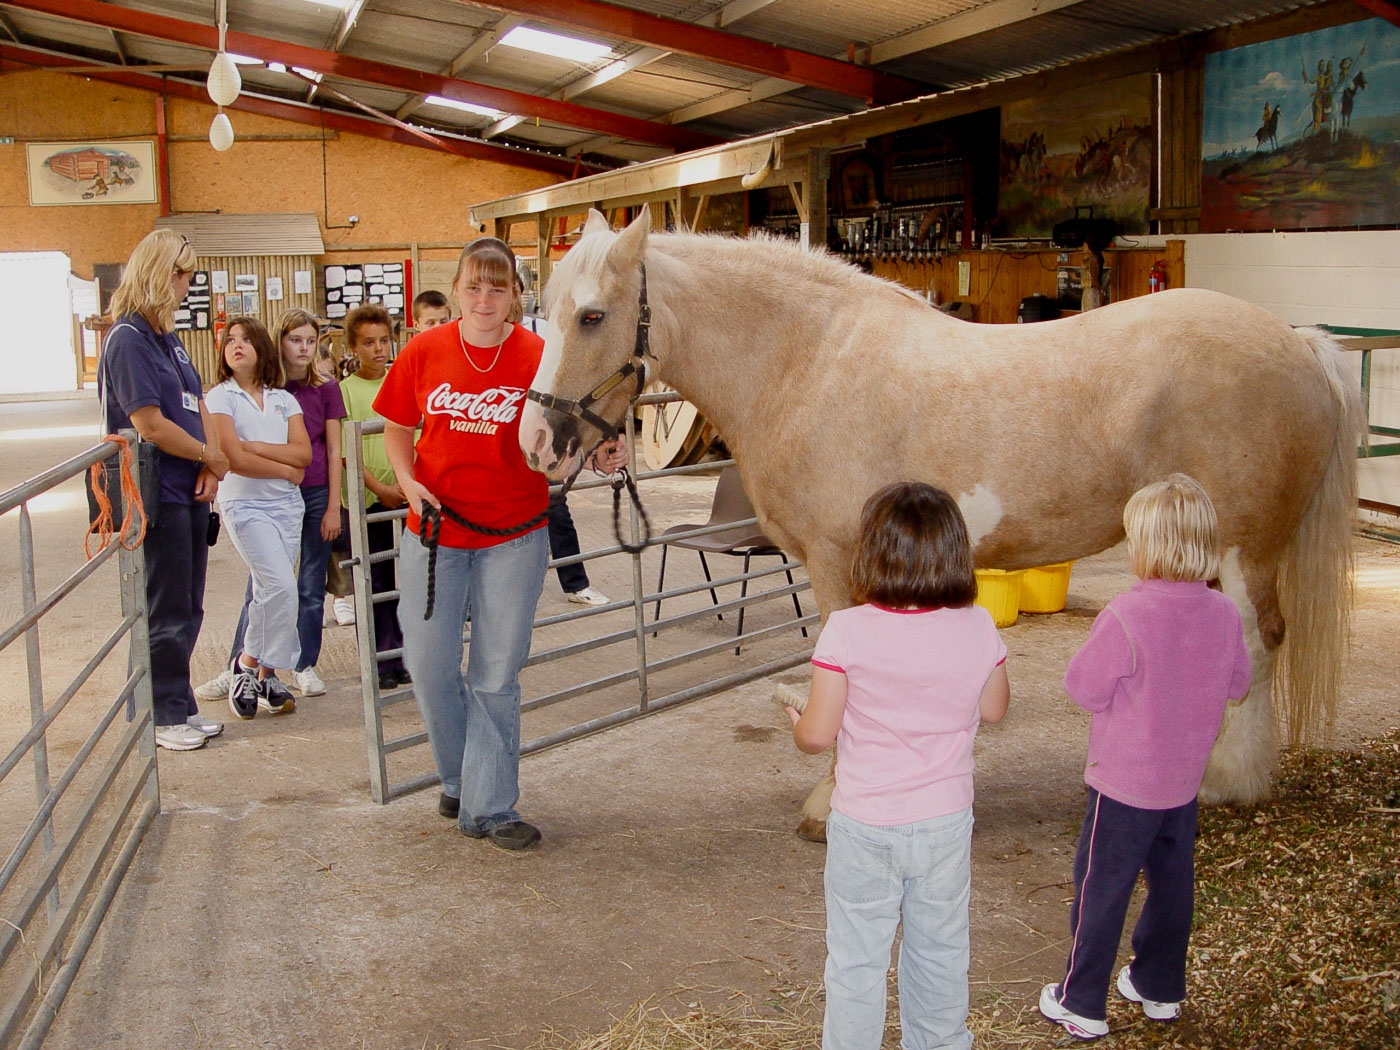 Children at an animal sanctuary petting a horse